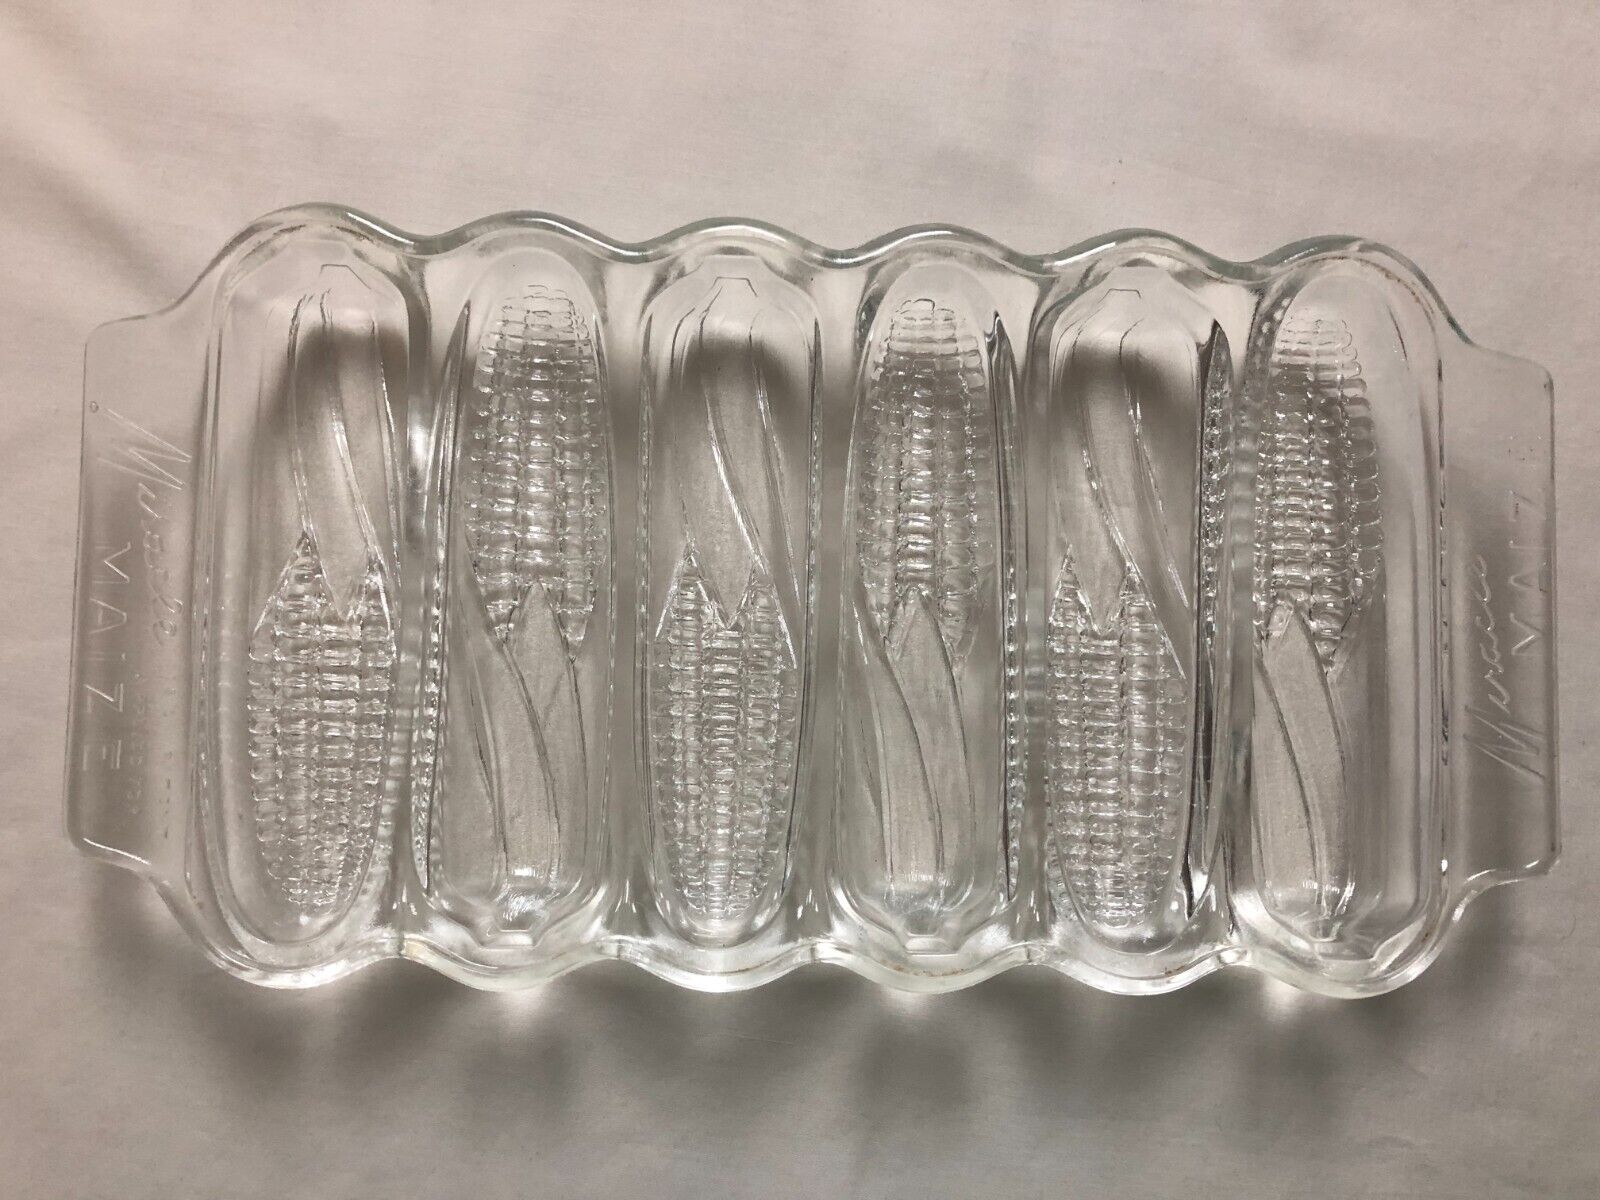 Vintage Miracle Maize Clear Glass Cornbread Baking Dish - 1940s - Corn Shaped